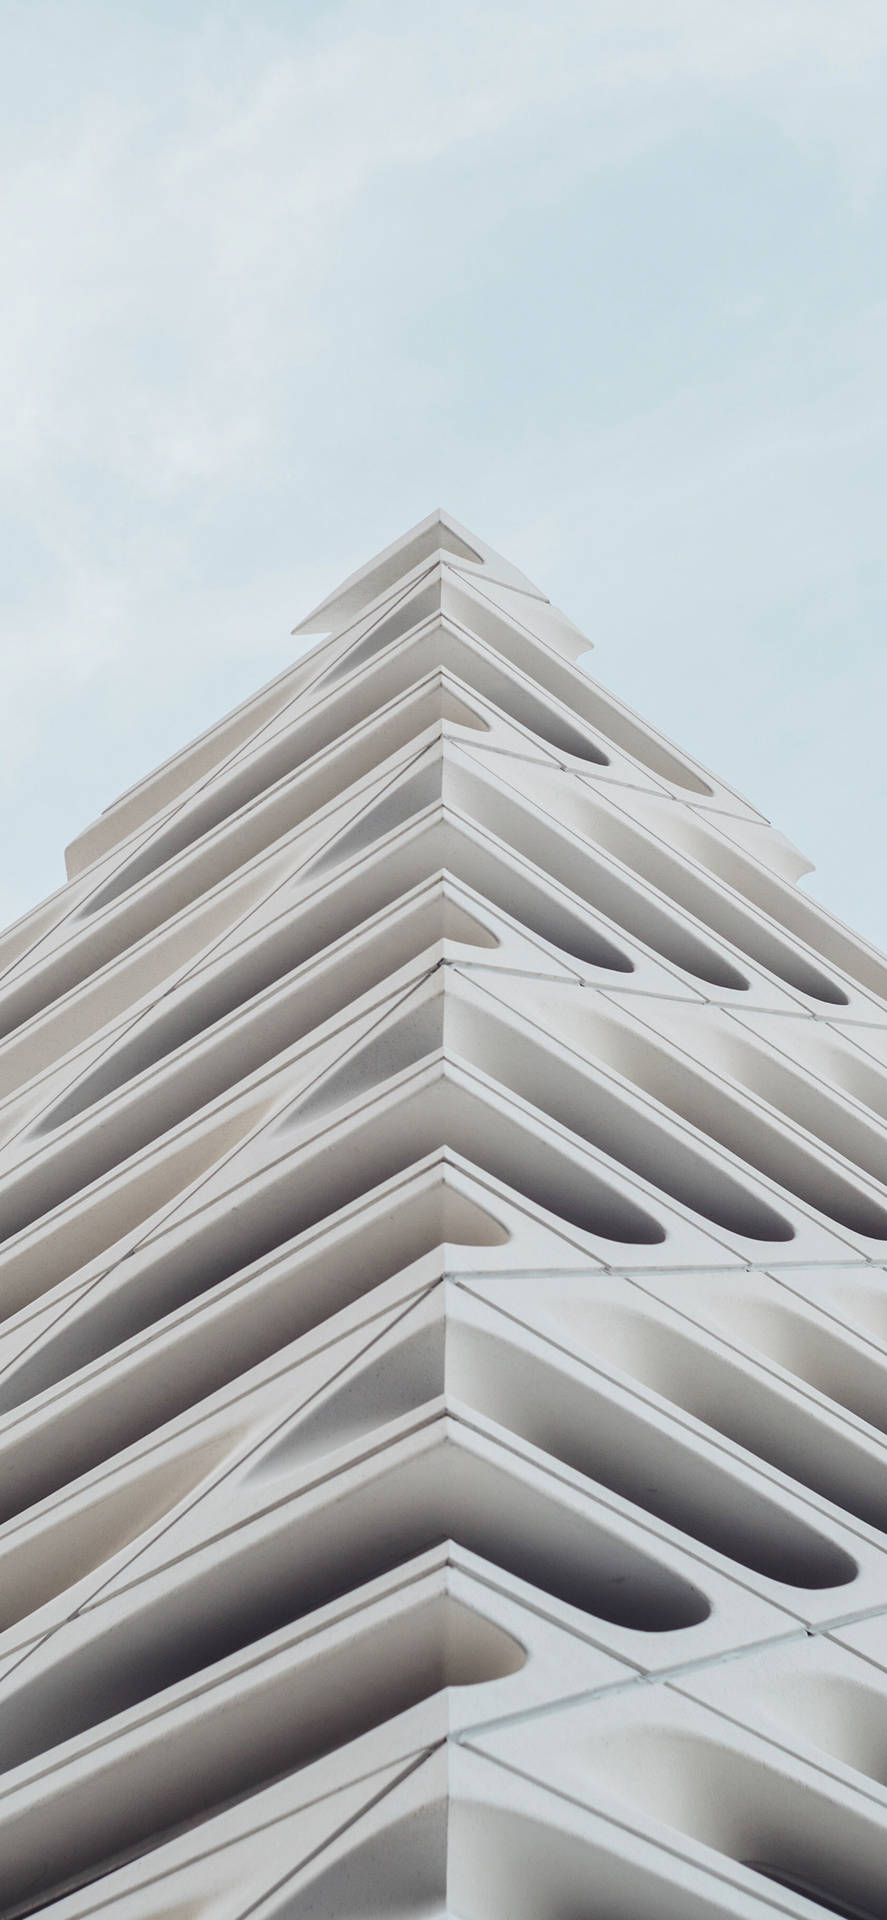 Cool Iphone Xs Max White Architecture Wallpaper